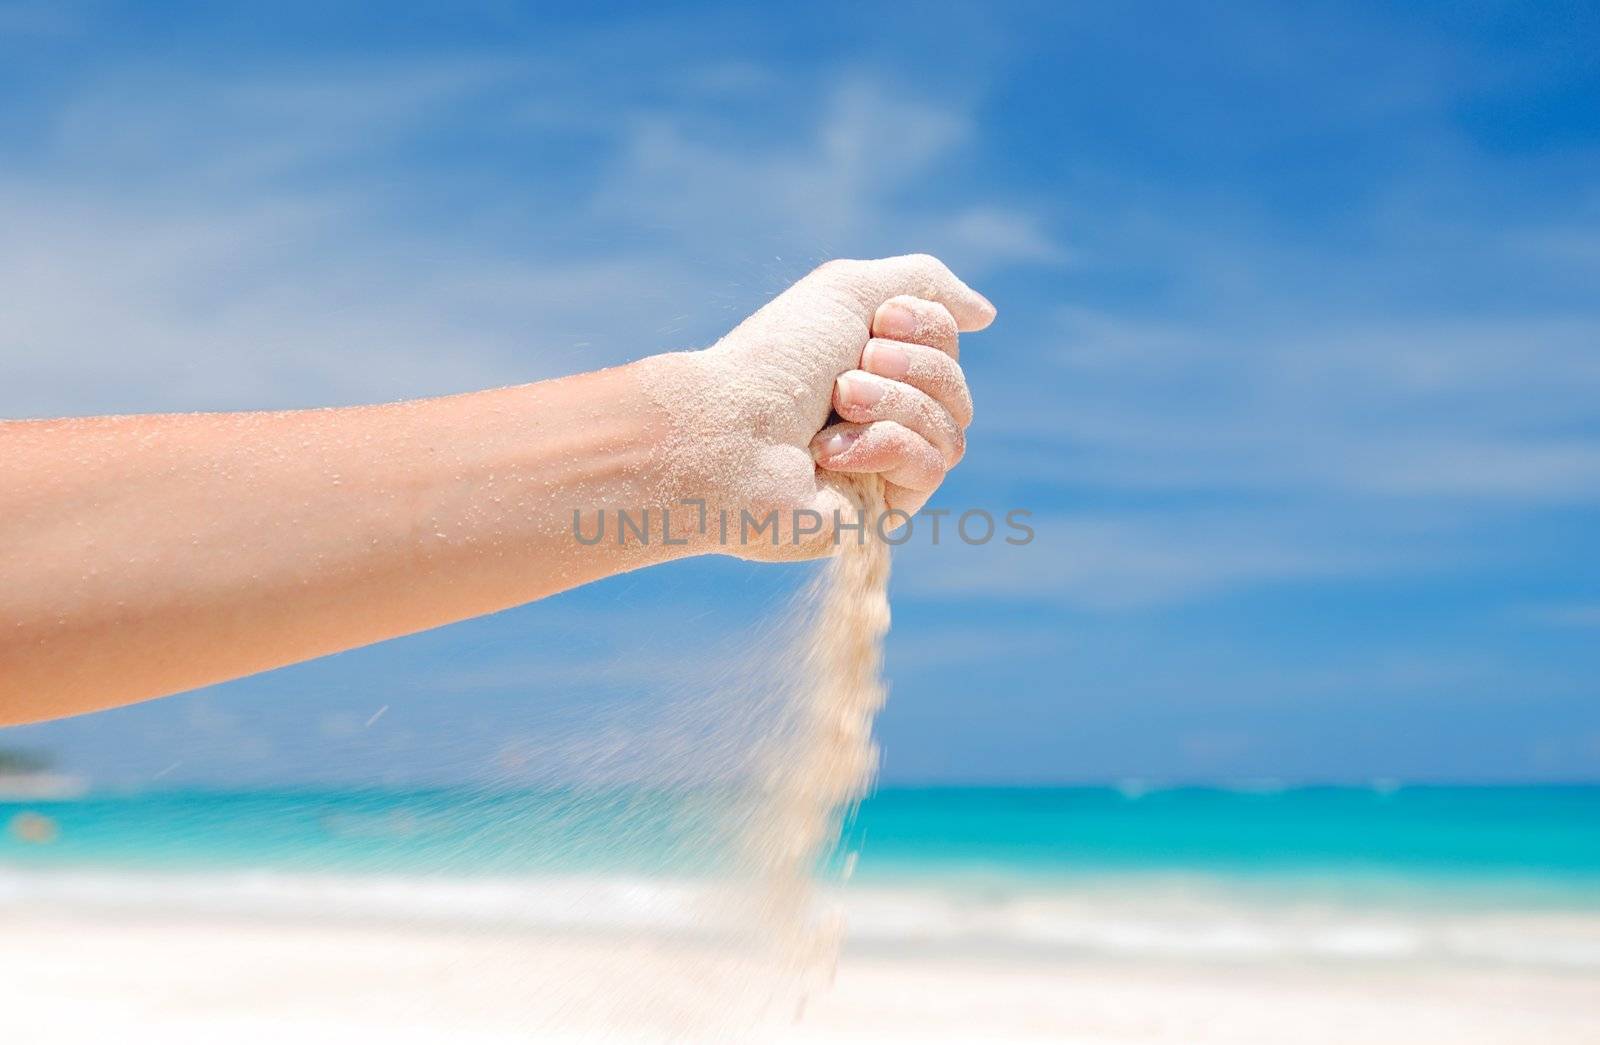 Coral white sand strewing from hand